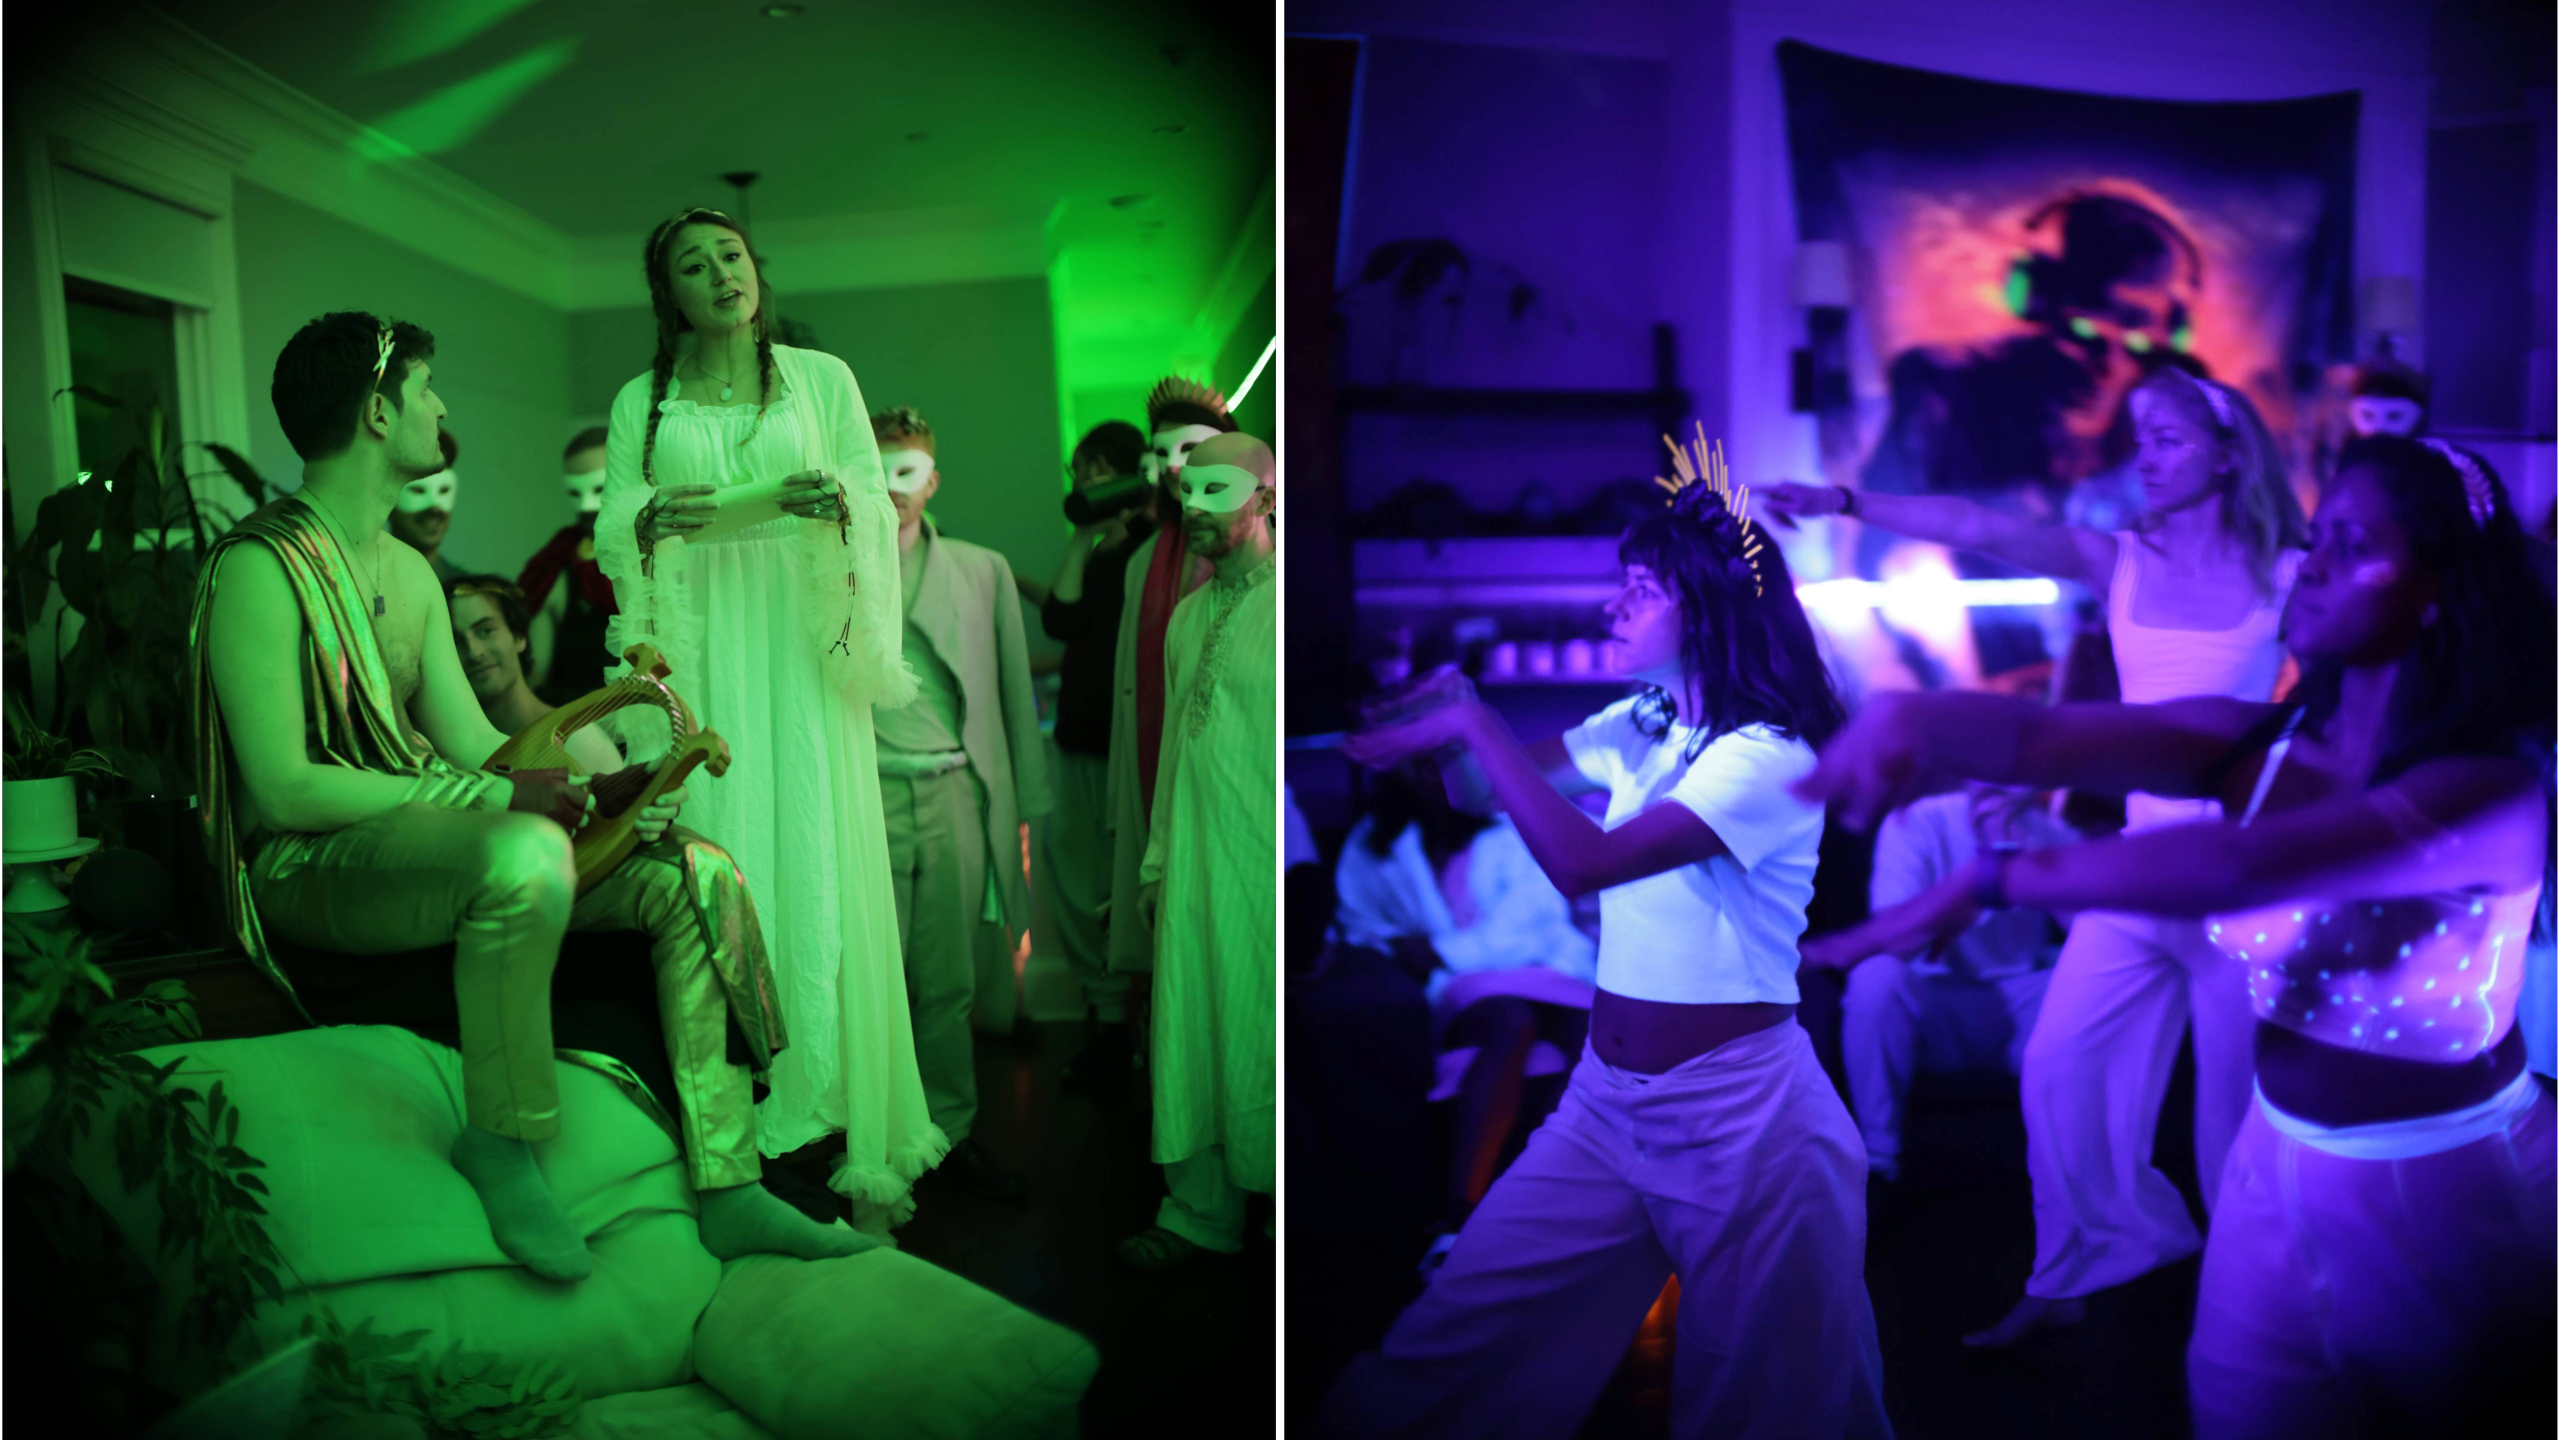 Two images depict themed parties: one with toga-wearing guests in green light, the other with dancers in neon blue light.